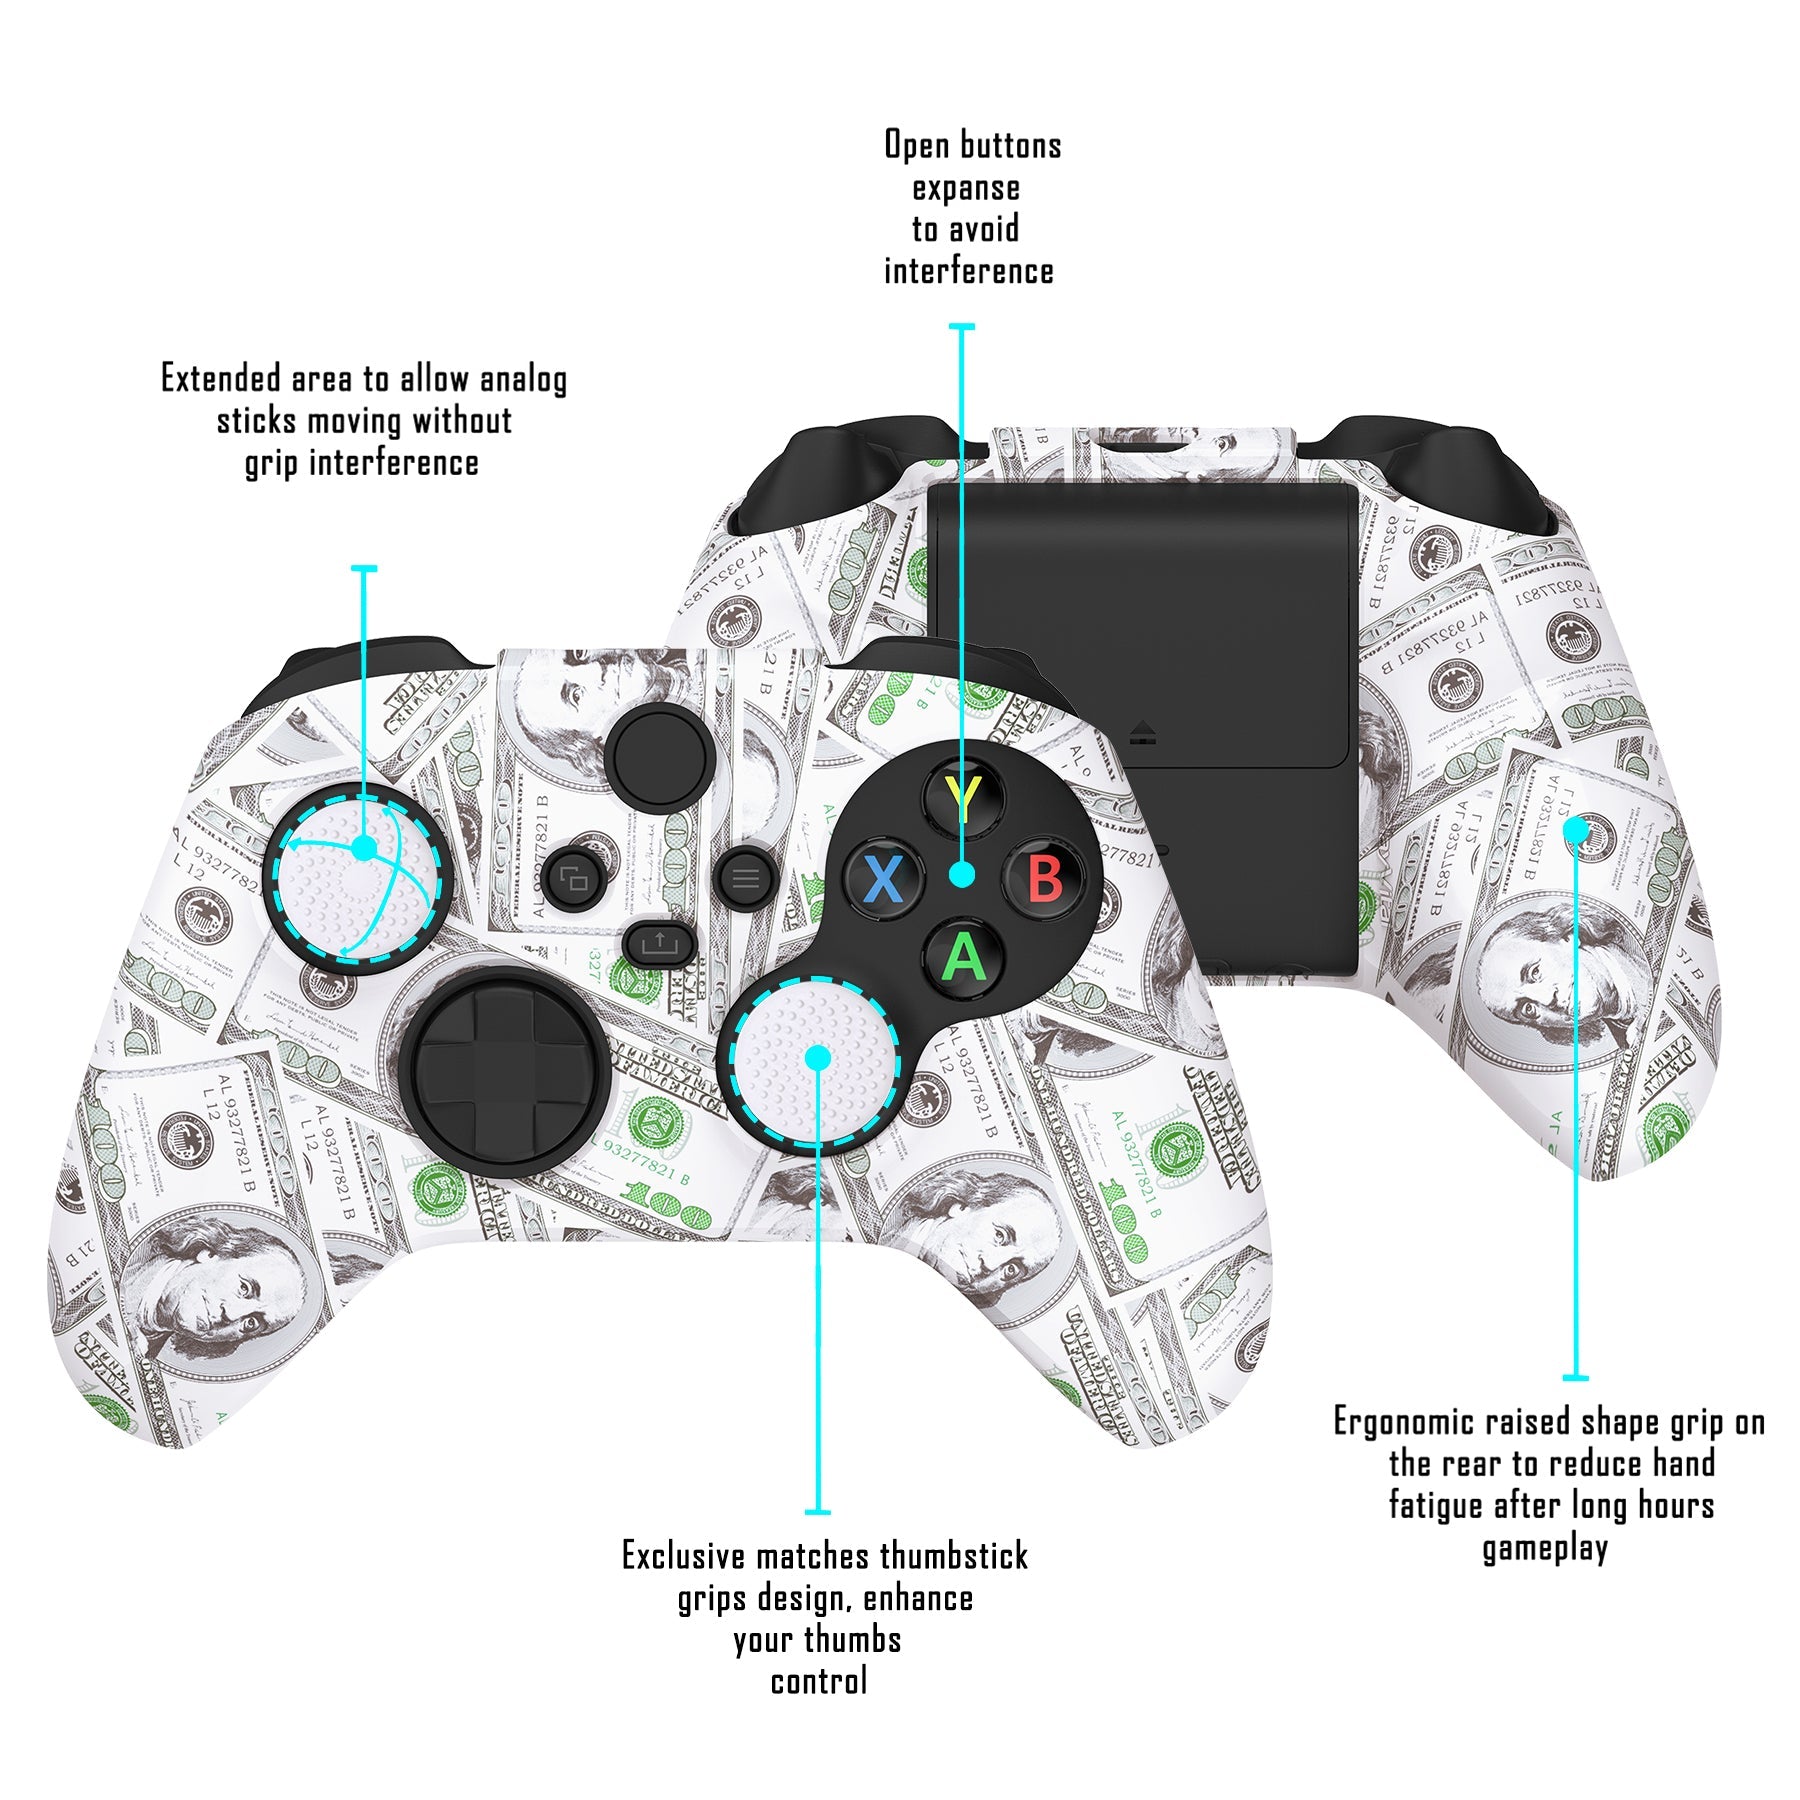 PlayVital Water Transfer Printing 100 Cash Money Dollar Pattern Silicone Cover Skin for Xbox Series X/S Controller, Soft Rubber Case Protector for Xbox Series X/S, Xbox Core Controller wtih 6 Thumb Grip Caps - BLX3022 PlayVital